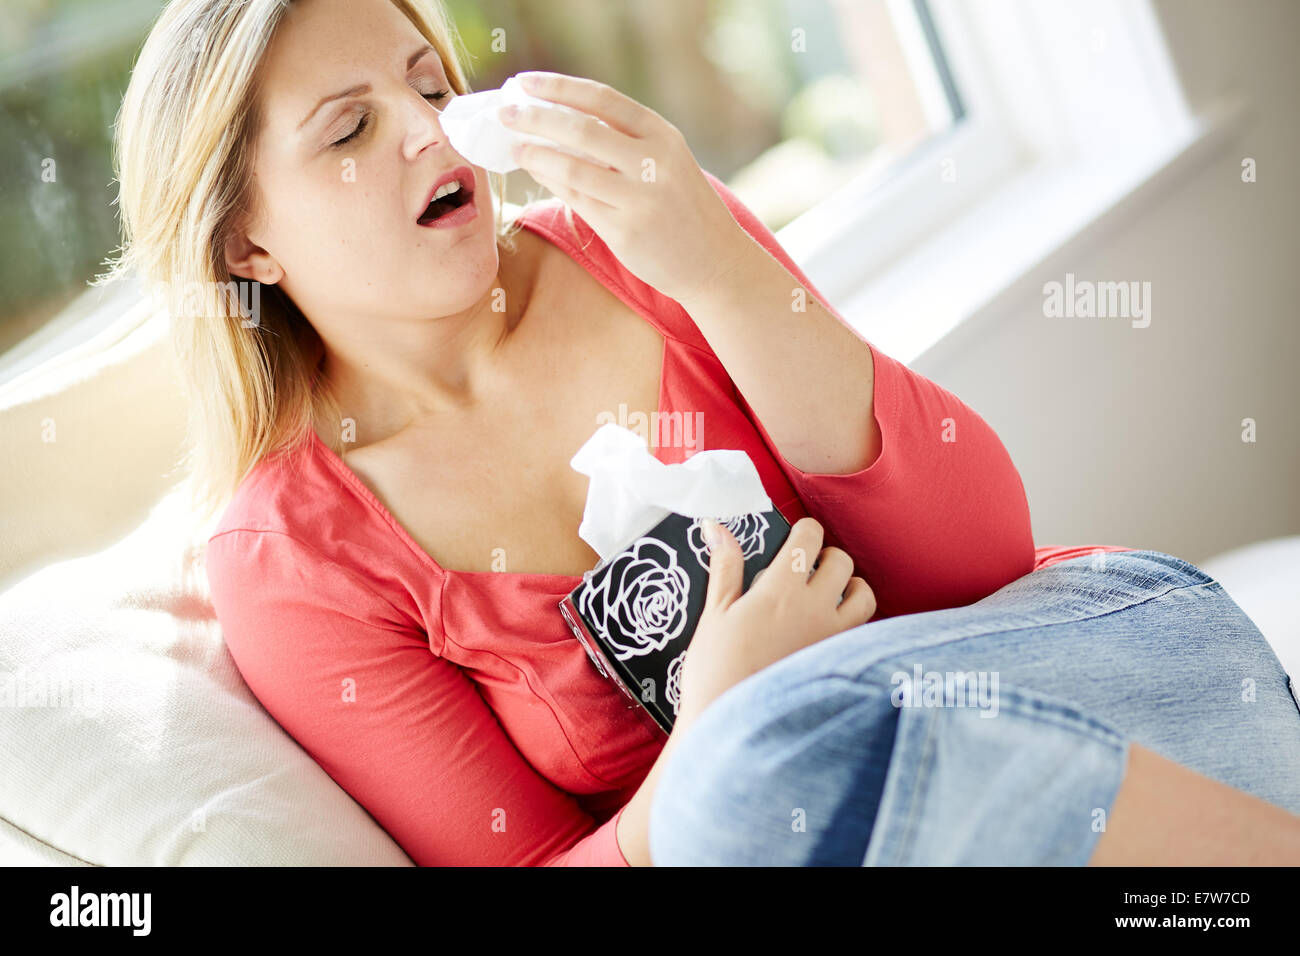 Woman feeling ill with a cold Stock Photo